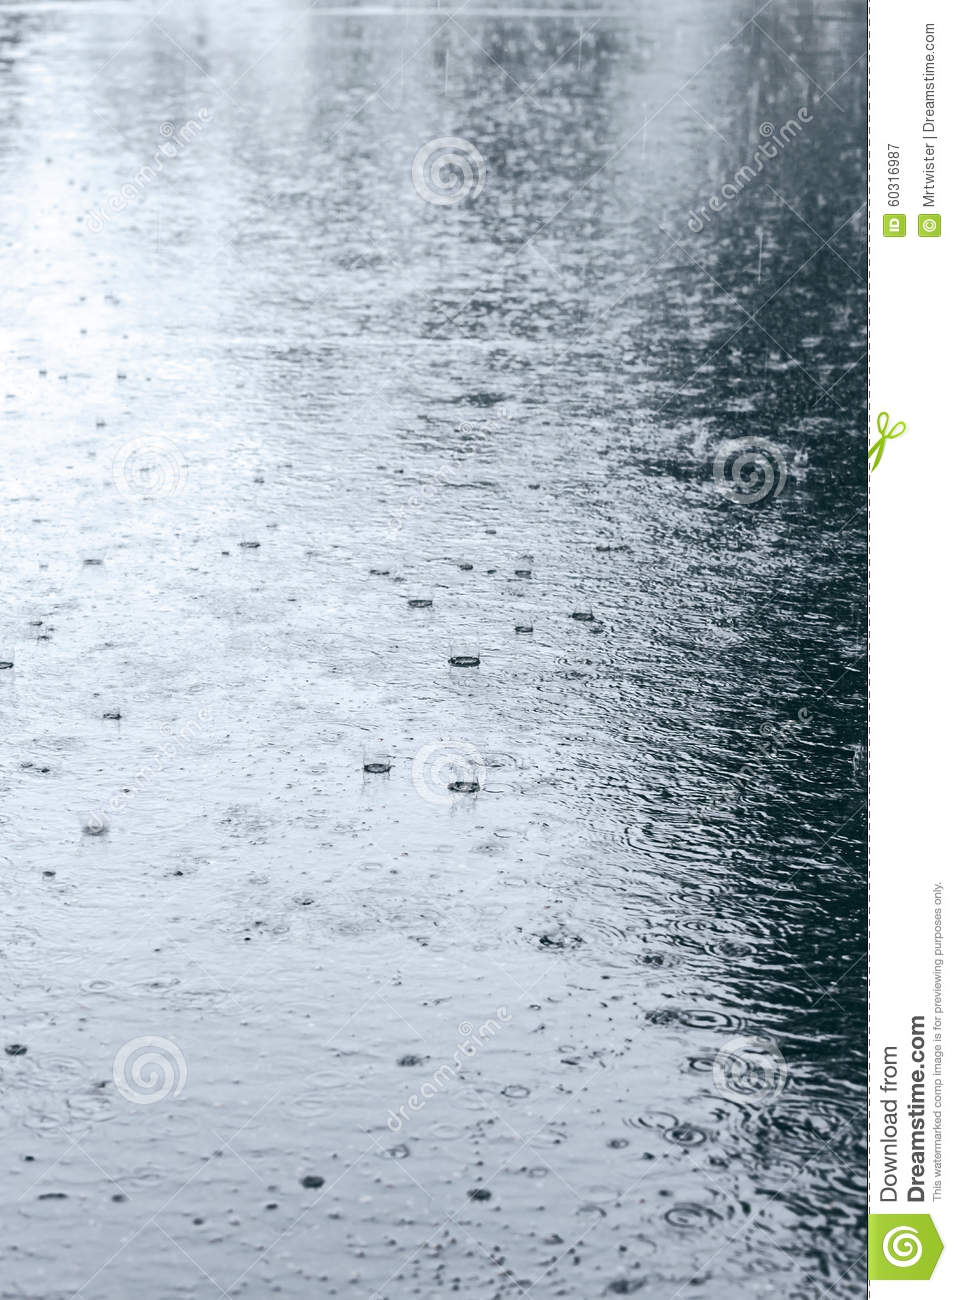 Wet Asphalt With Puddles And Raindrops Stock Photo   Image  60316987